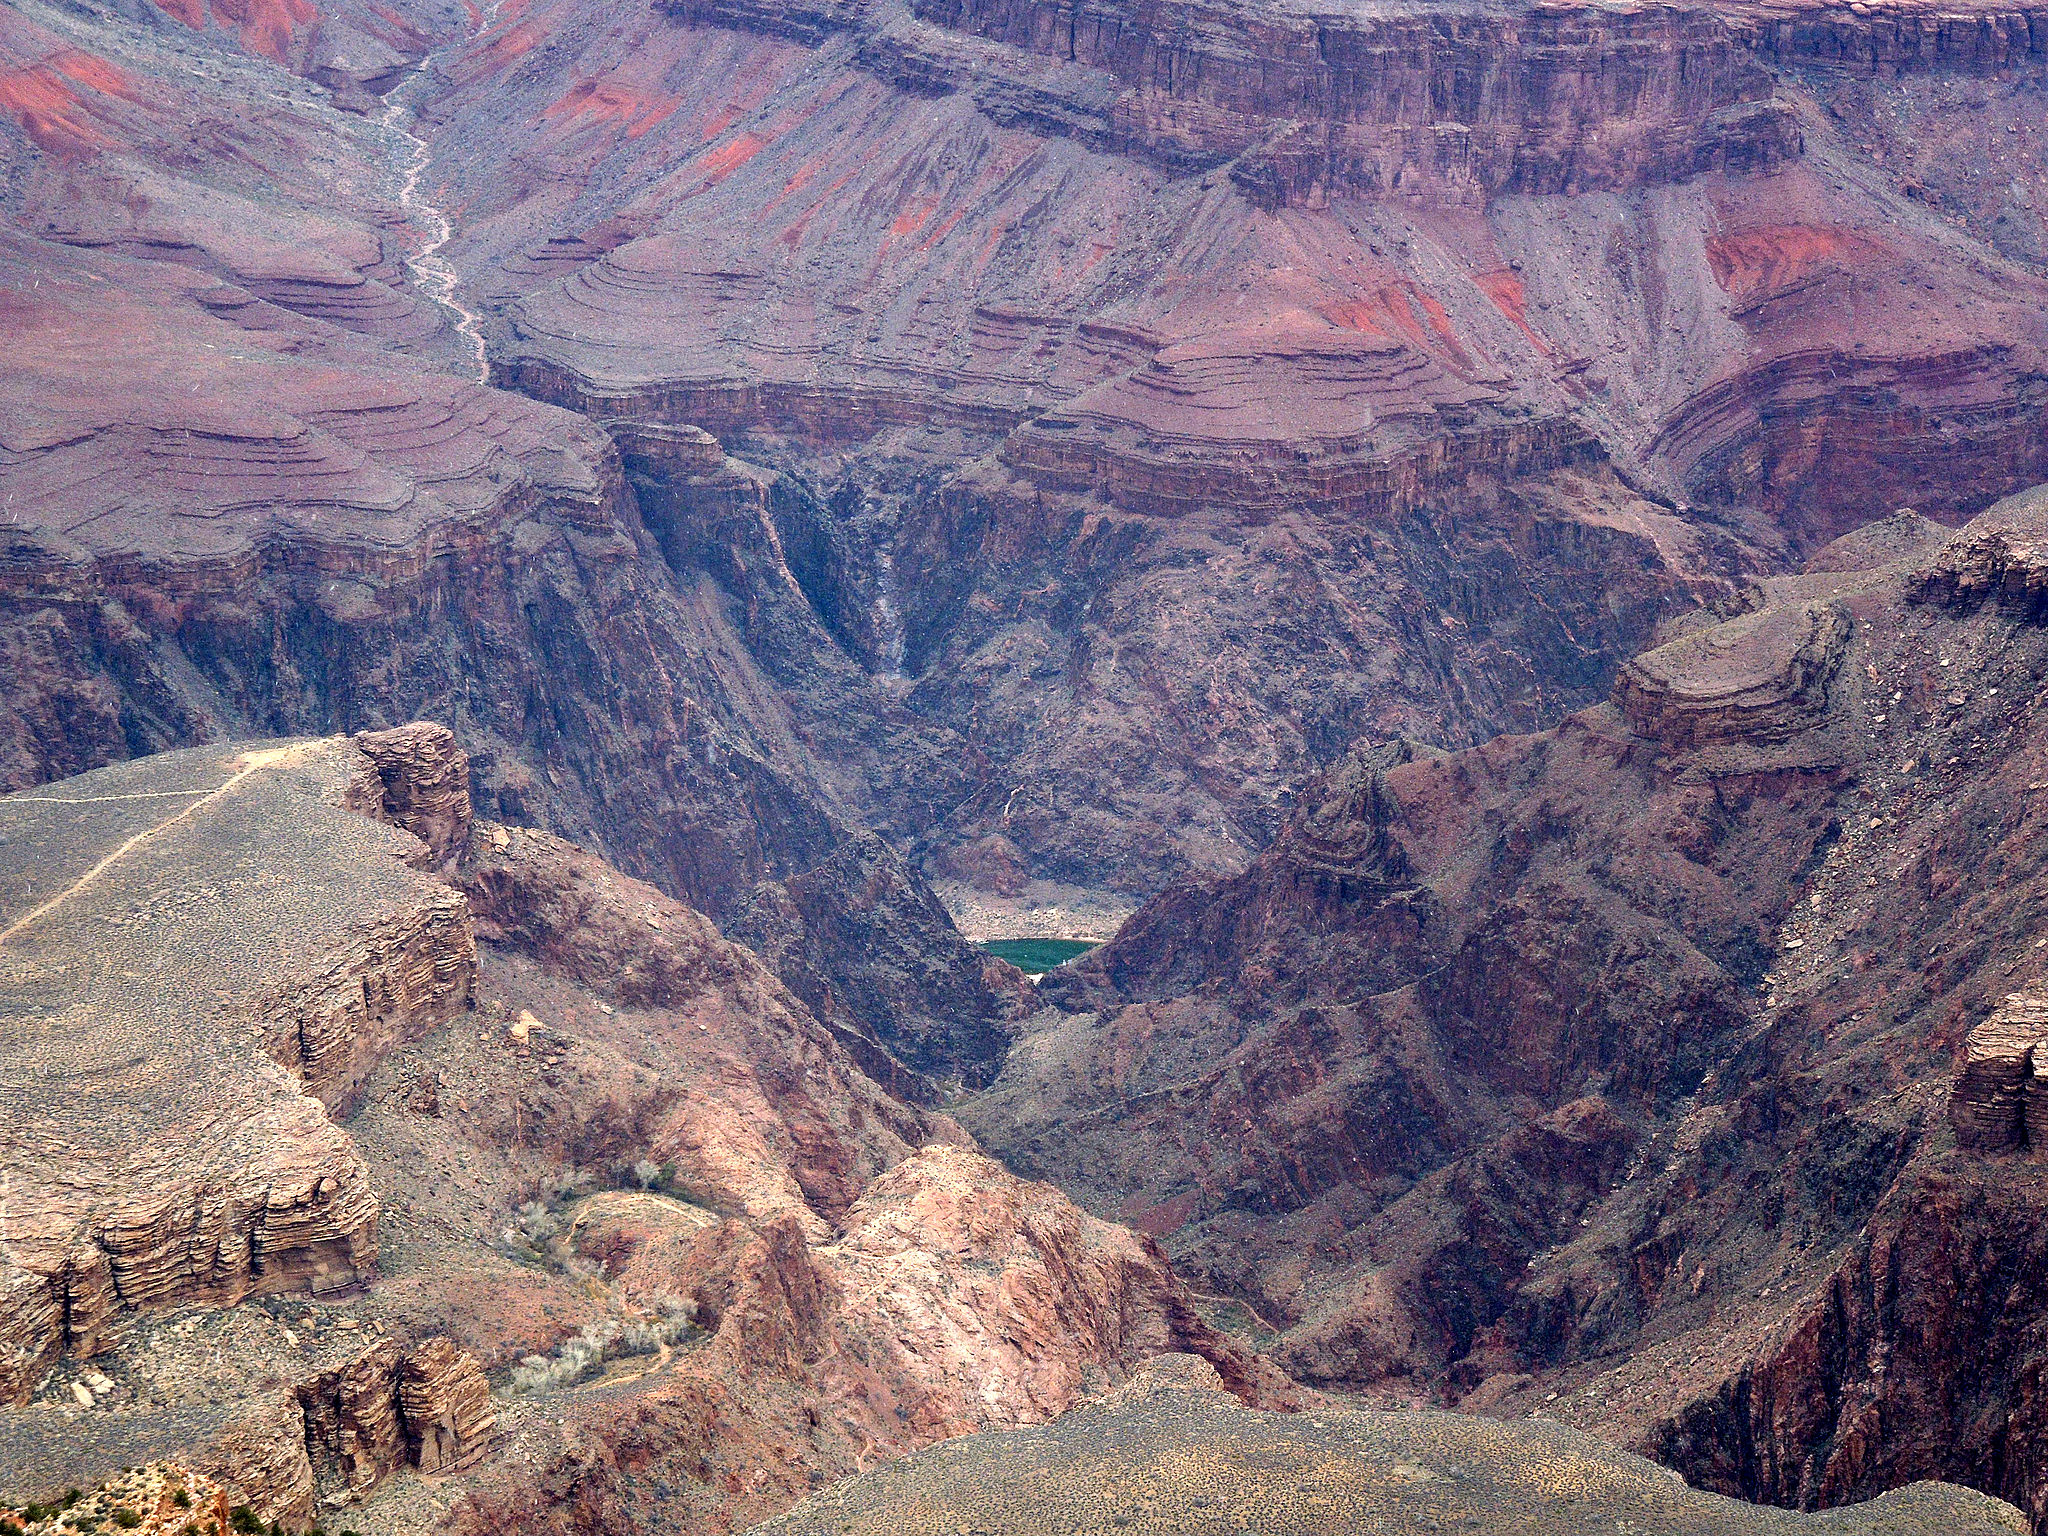 View of canyon walls of the Grand Canyon in which you can see flat-lying layers of reddish sedimentary rock overlying dark brownish rocks that don't have any layering.